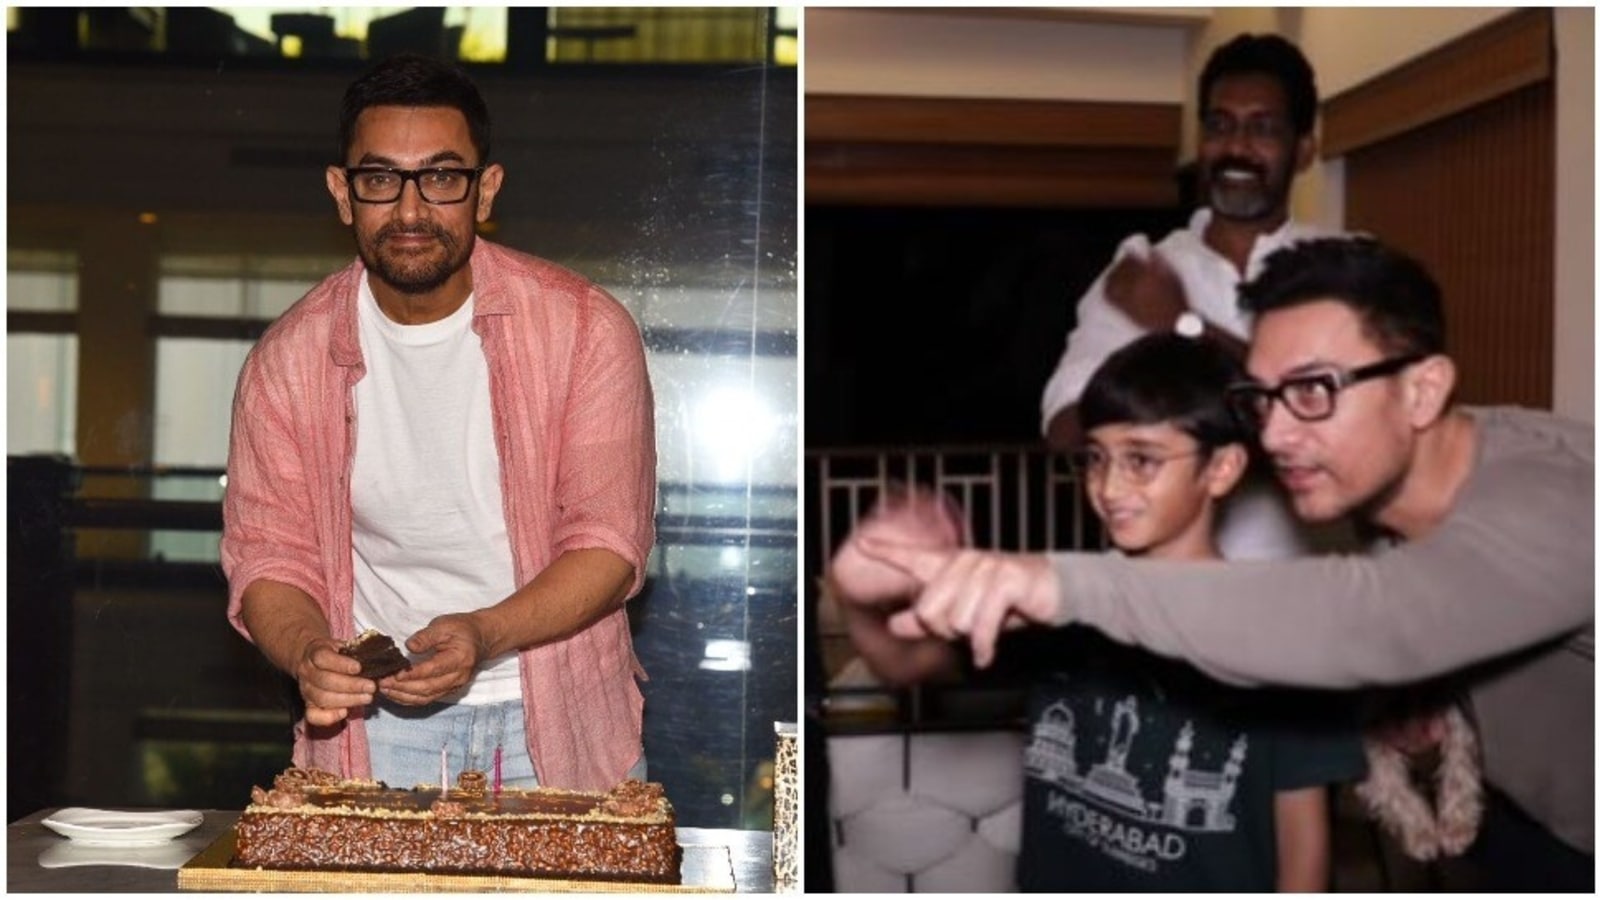 ‘Waiting to see what Azad gifts me,’ says Aamir Khan as he celebrates birthday with paparazzi, cuts cake. Watch